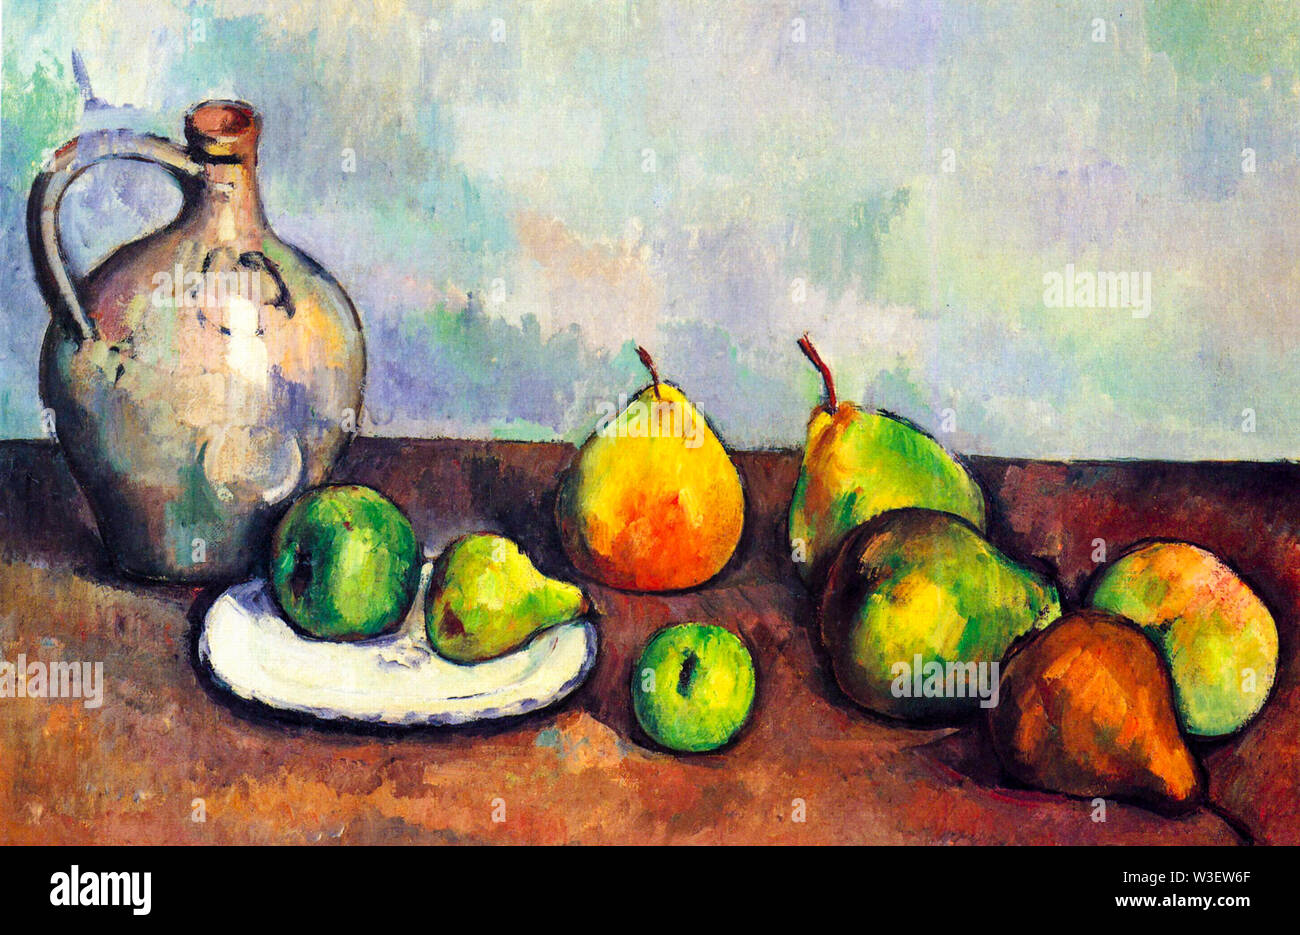 Paul Cézanne, Still life with pitcher and fruit, still life painting, 1894 Stock Photo